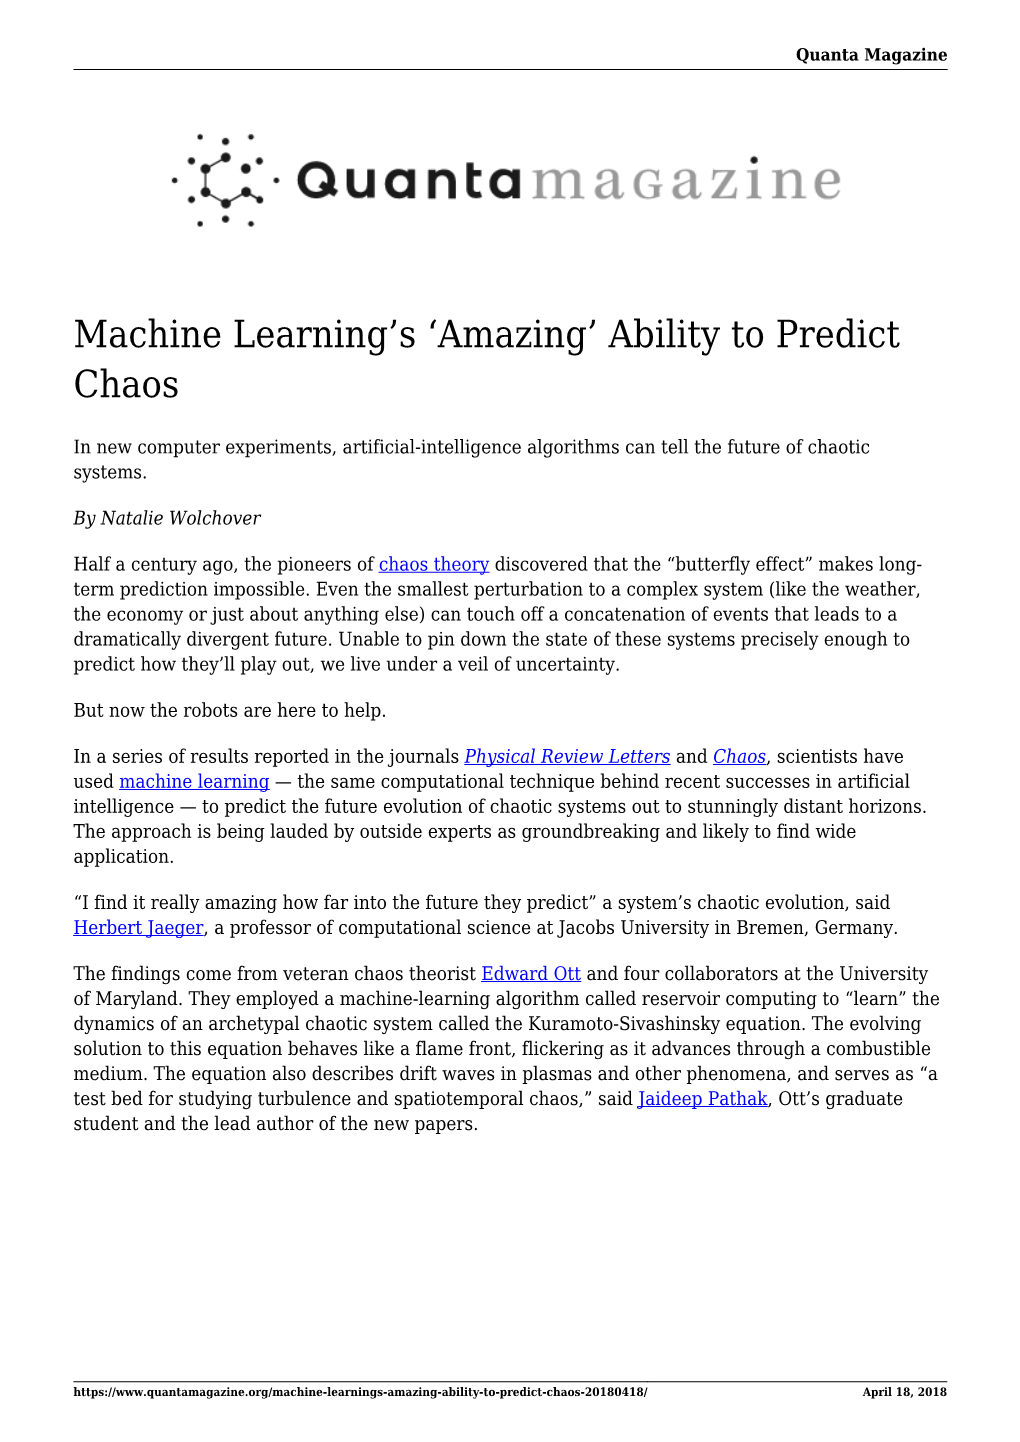 Machine Learning's